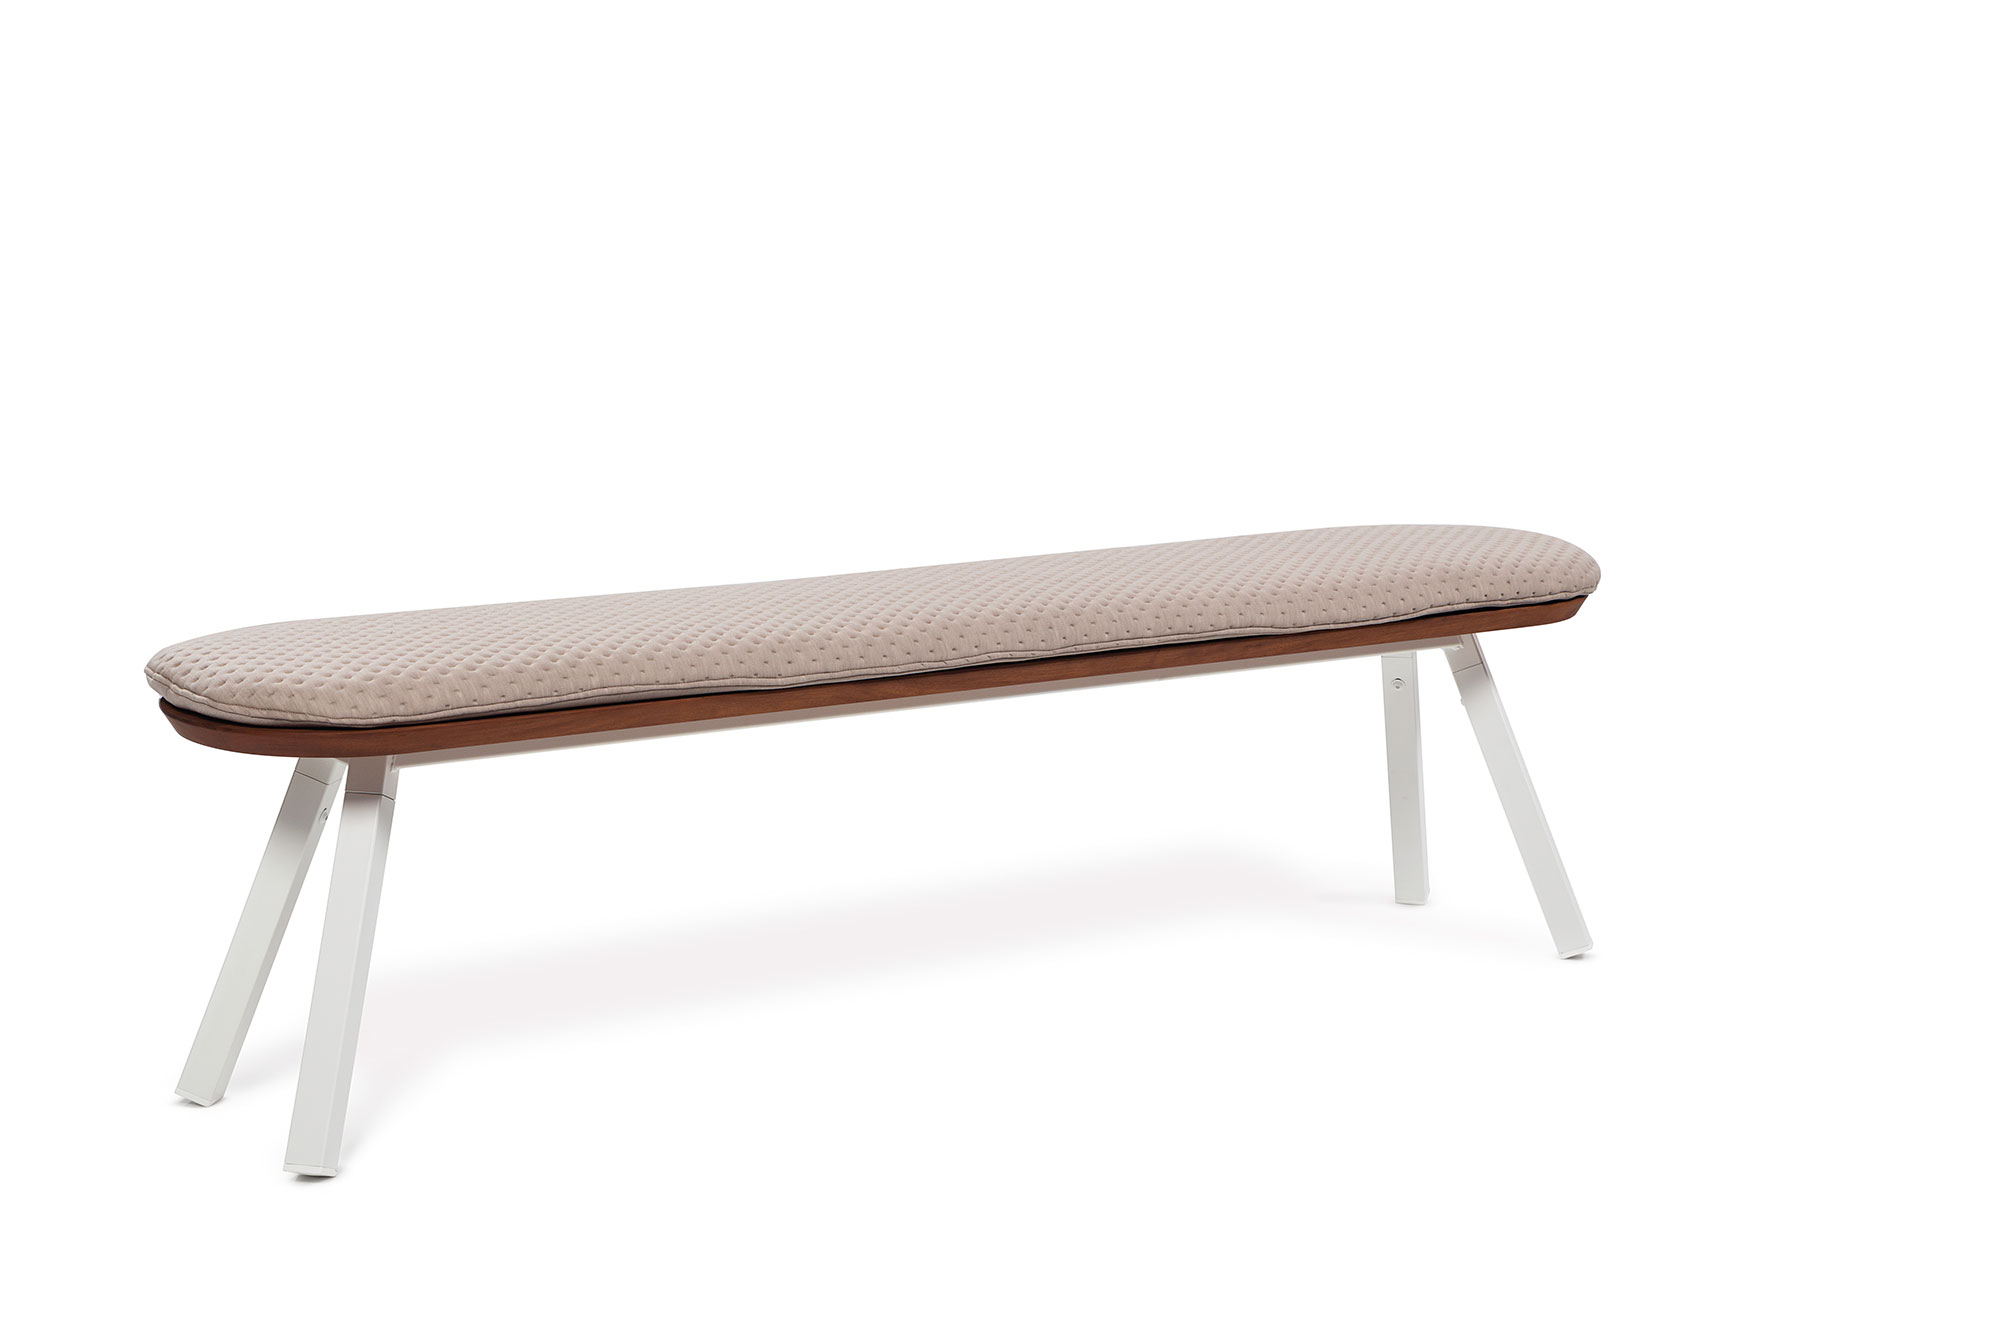 Seat cushion for the bench 180 cm "In- & outdoor" - design YM from RS Barcelona